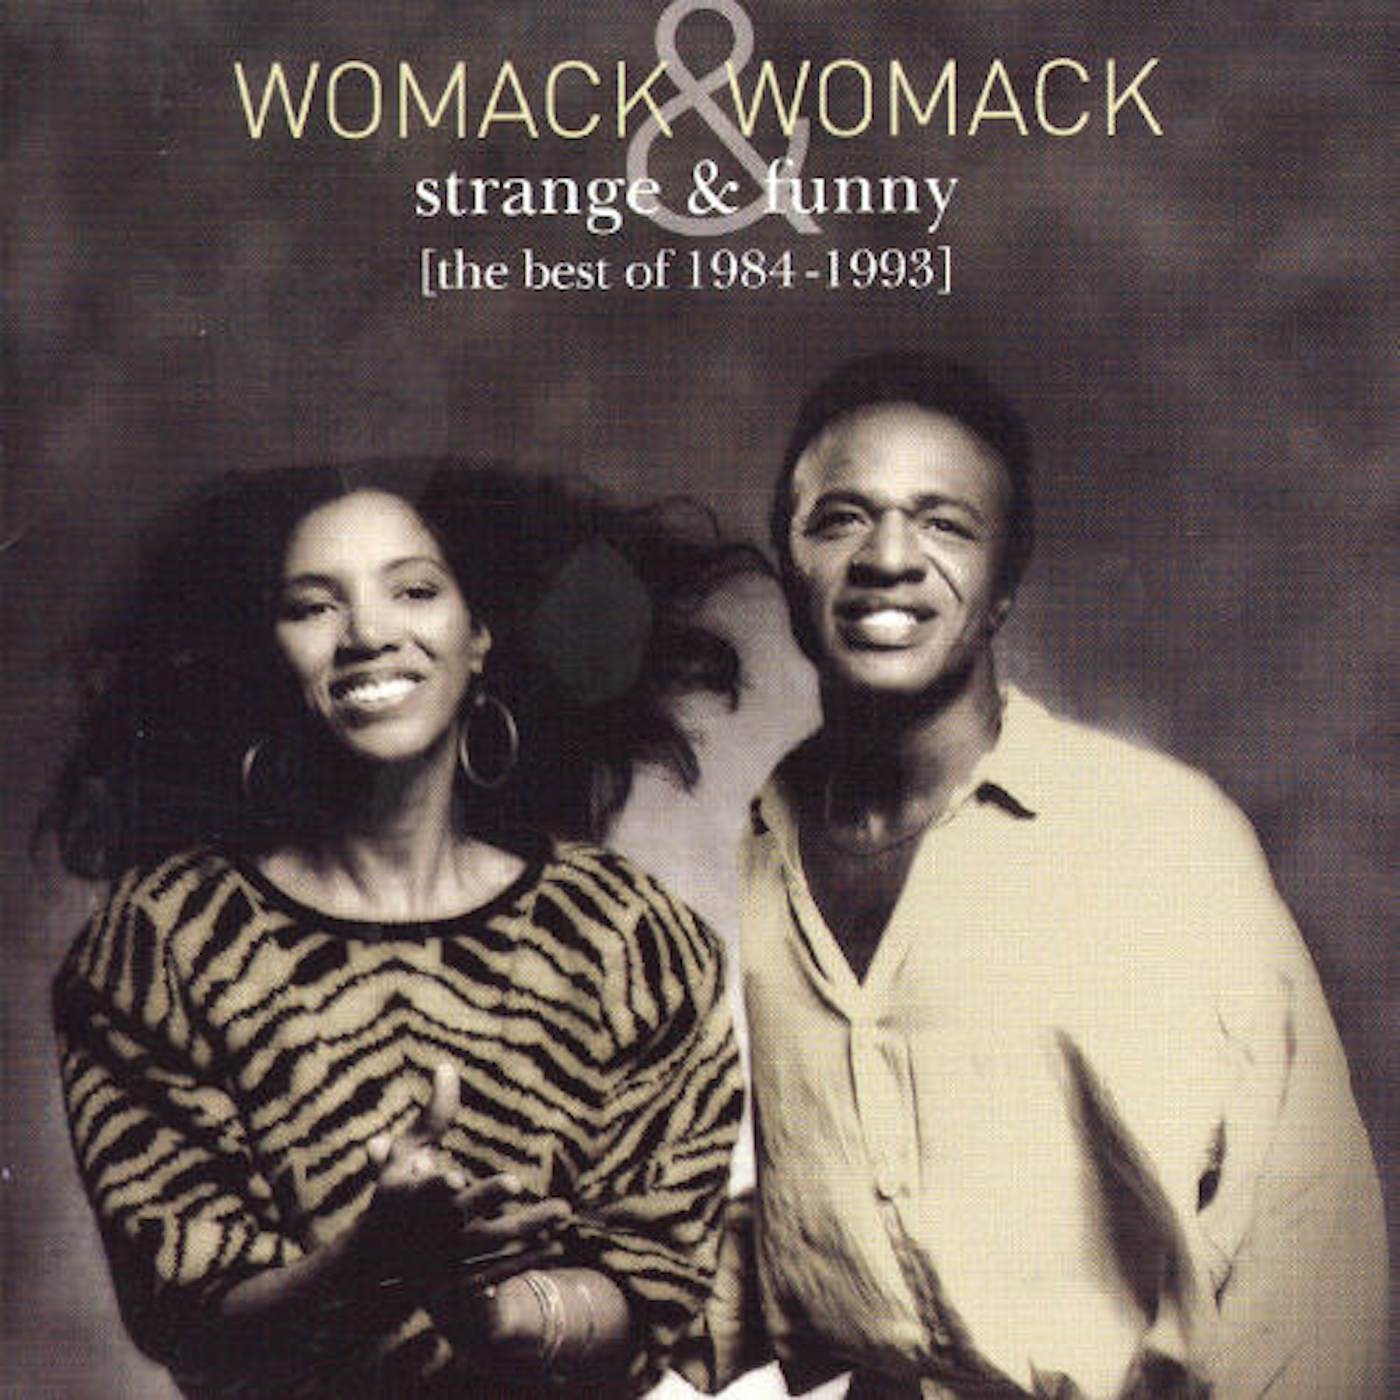 Womack & Womack BEST OF 1984-1993: STRNAGE & FUNNY CD